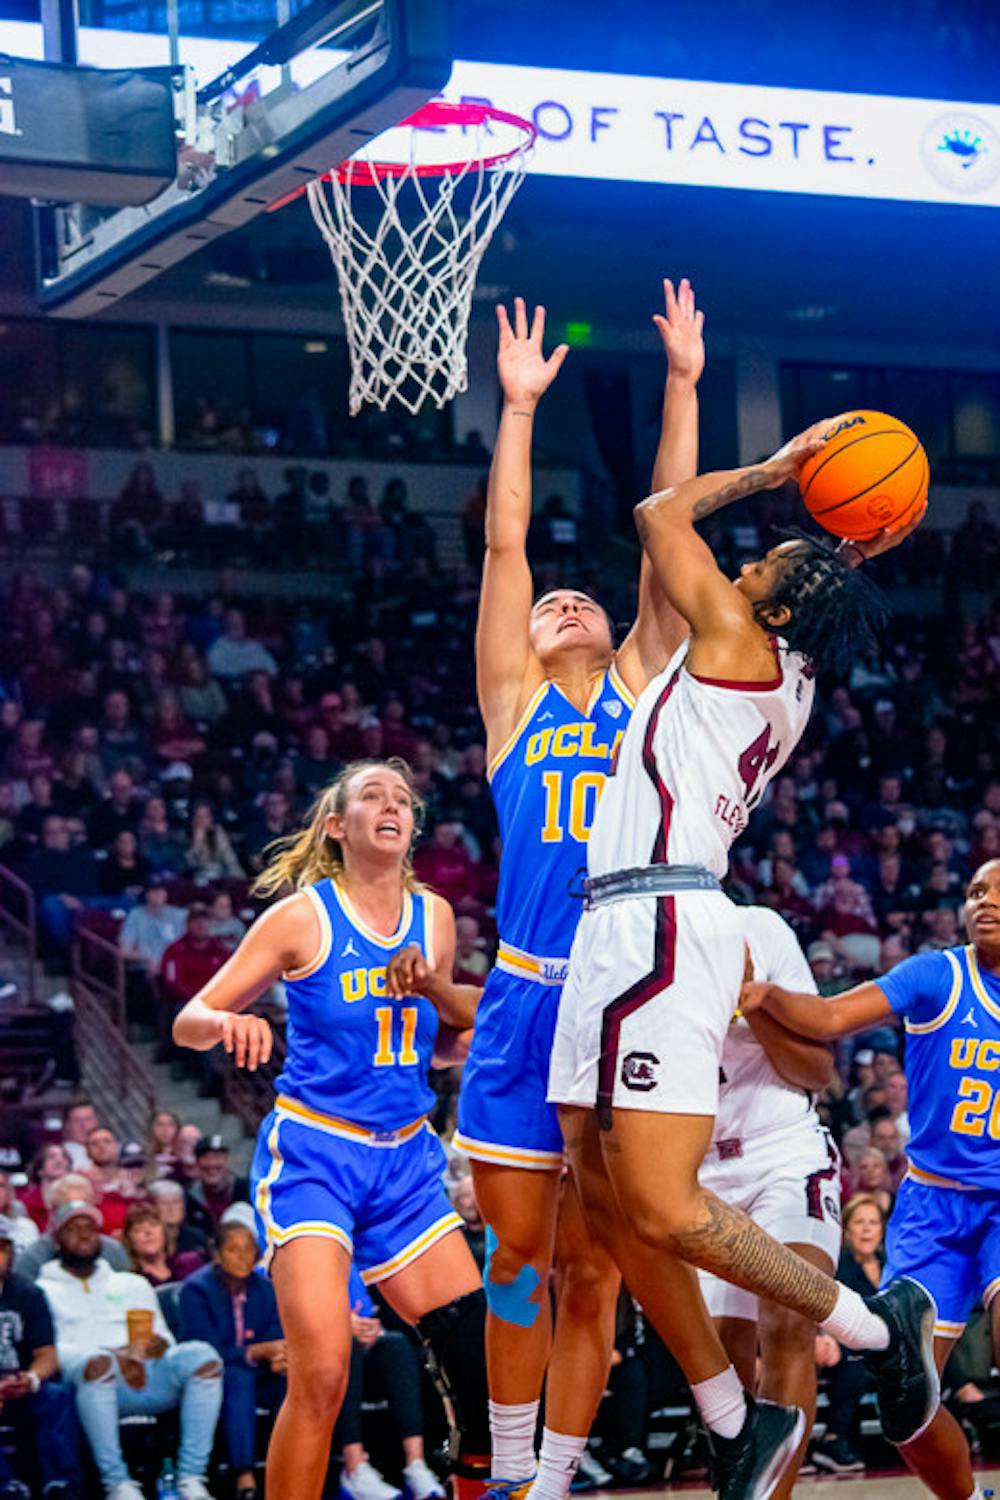 Graduate guard Kierra Fletcher attempts a layup during the matchup against UCLA on Nov. 29, 2022. Fletcher scored twelve points for the Gamecocks in the second half of the match. The Gamecocks beat the Bruins 73-64.